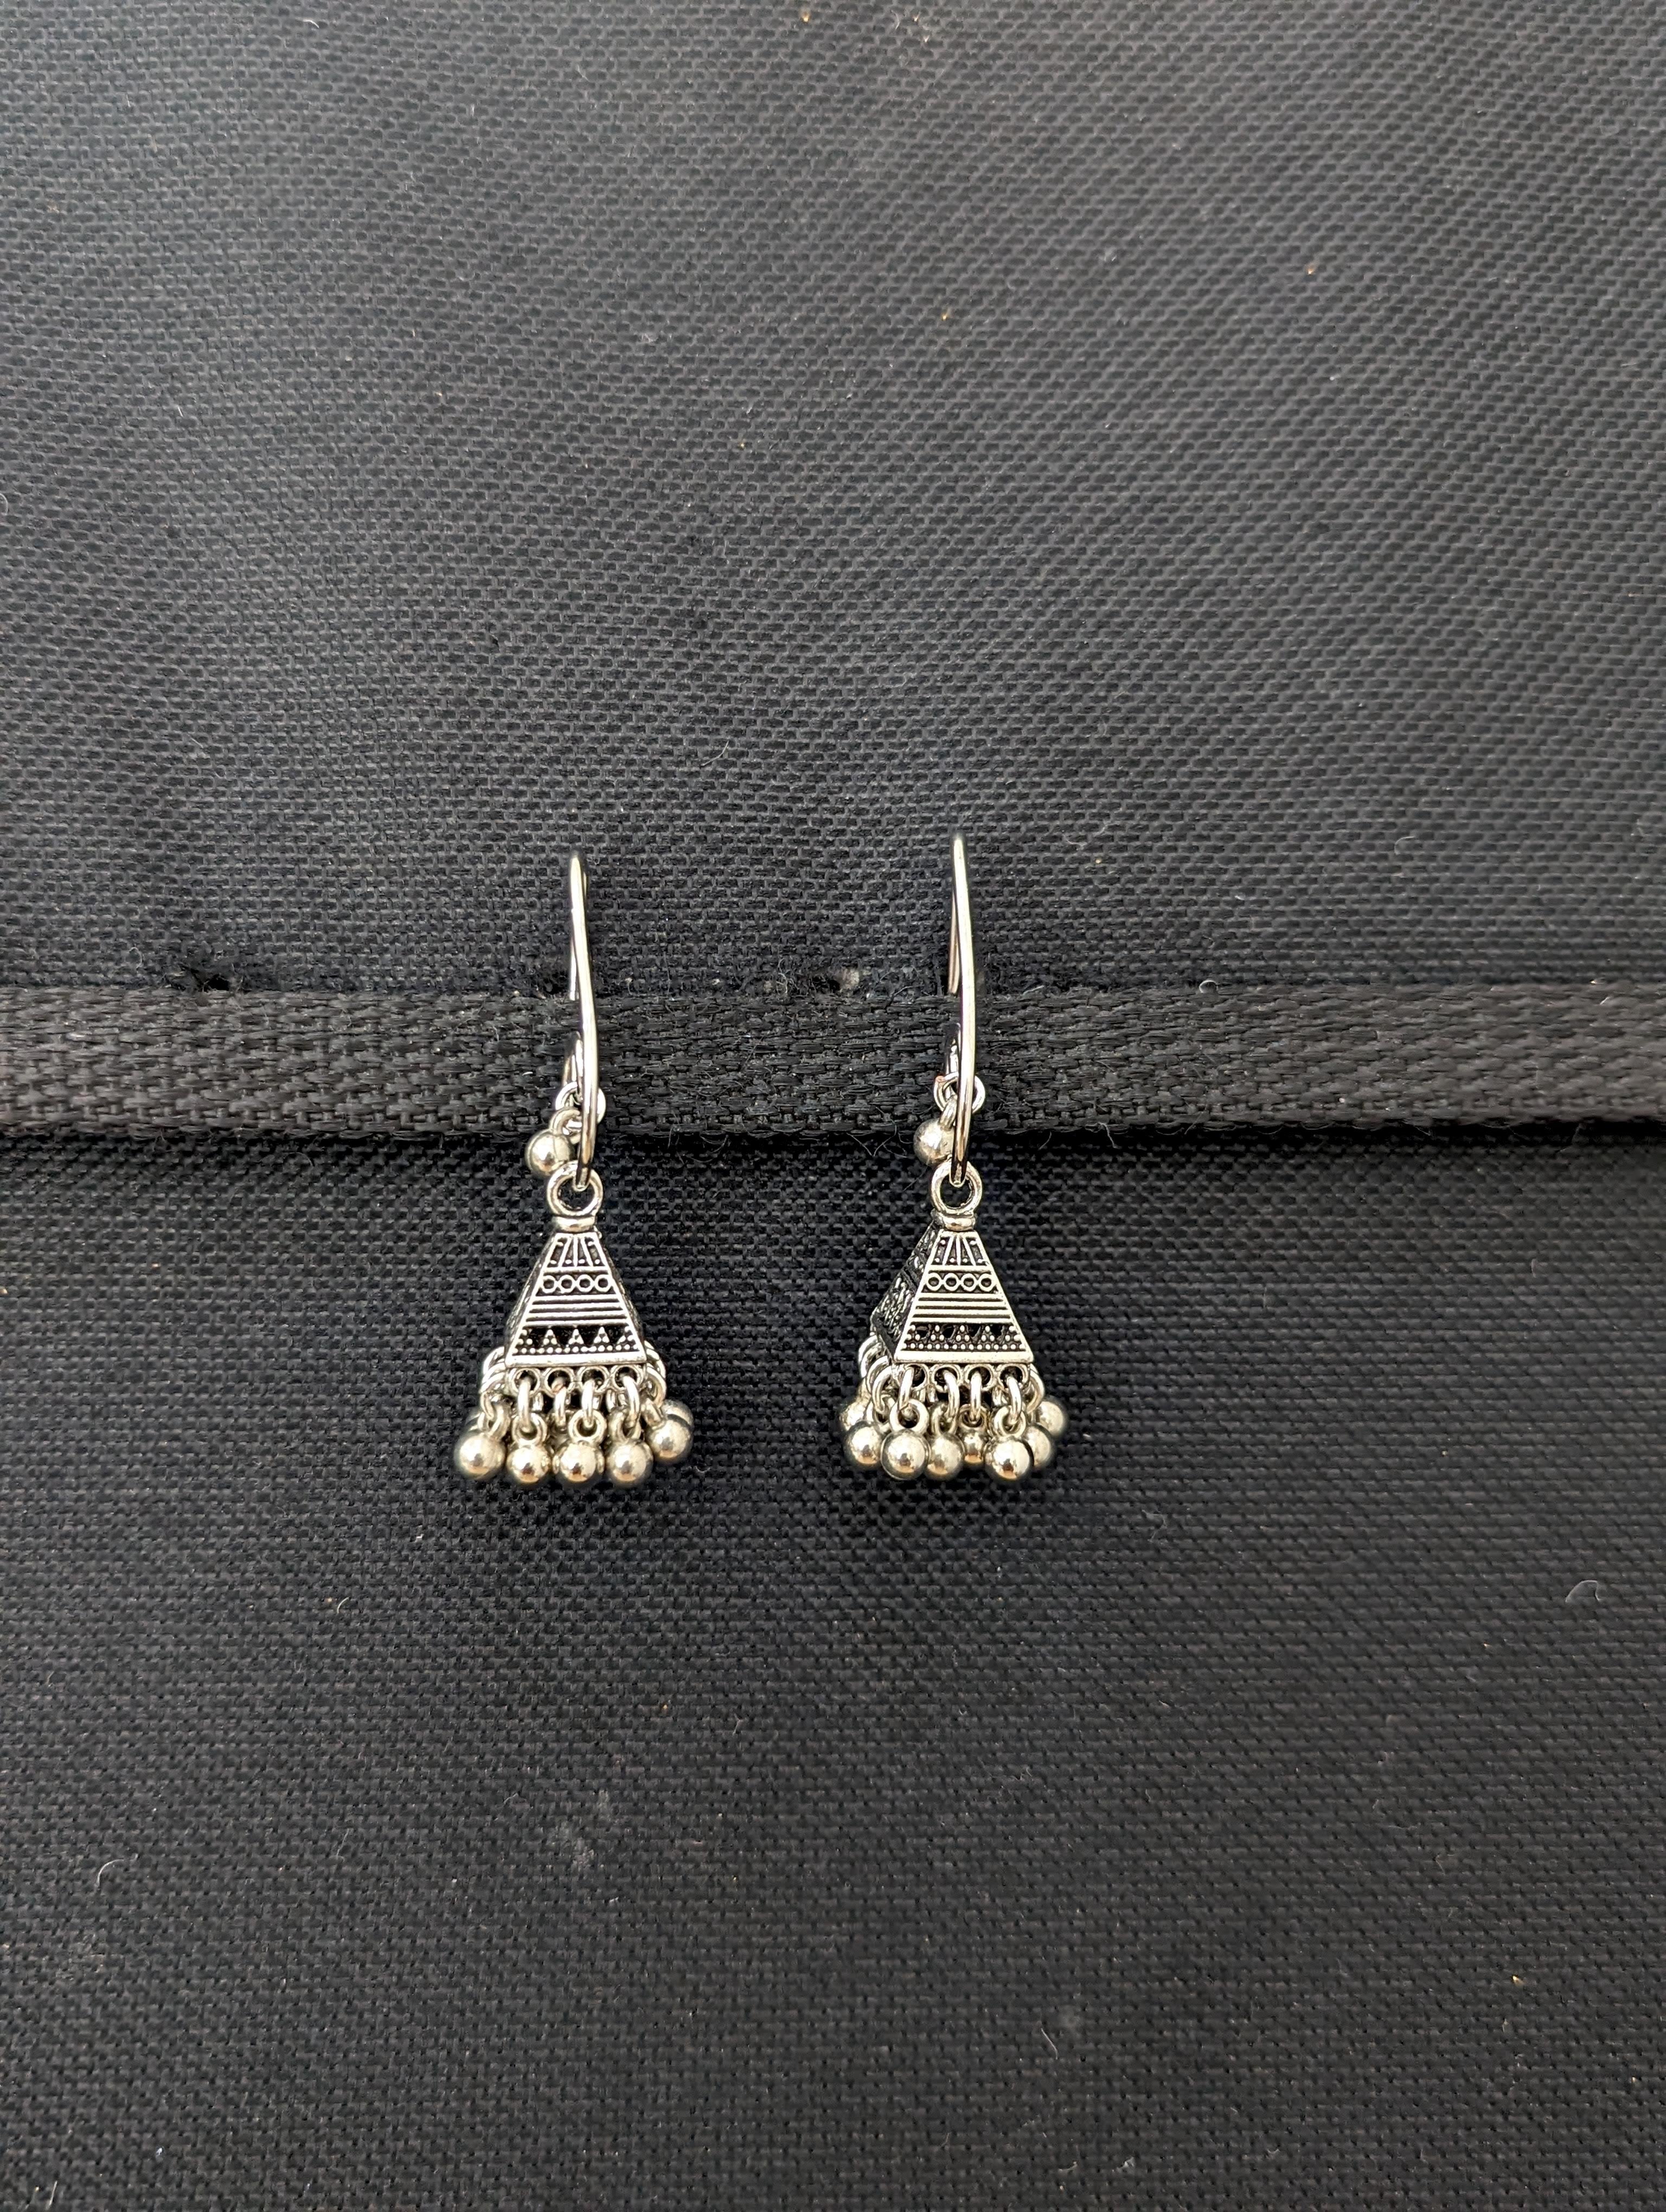 925 Silver Earrings with Intricate Circle Design - Diavo Jewels